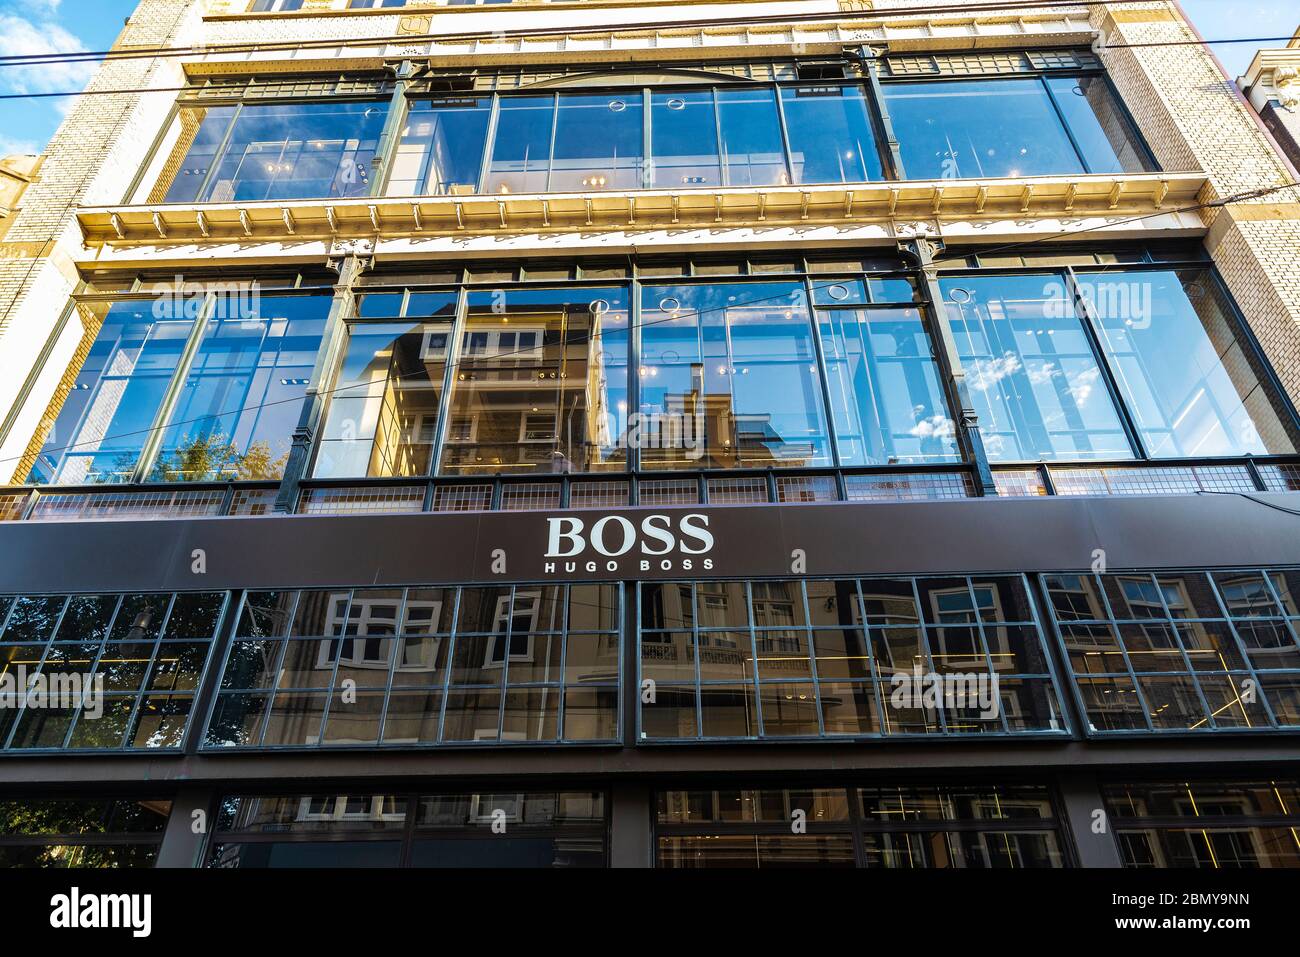 Amsterdam, Netherlands - September 9, 2018: Facade of a Hugo Boss clothing  store in the center of Amsterdam, Netherlands Stock Photo - Alamy